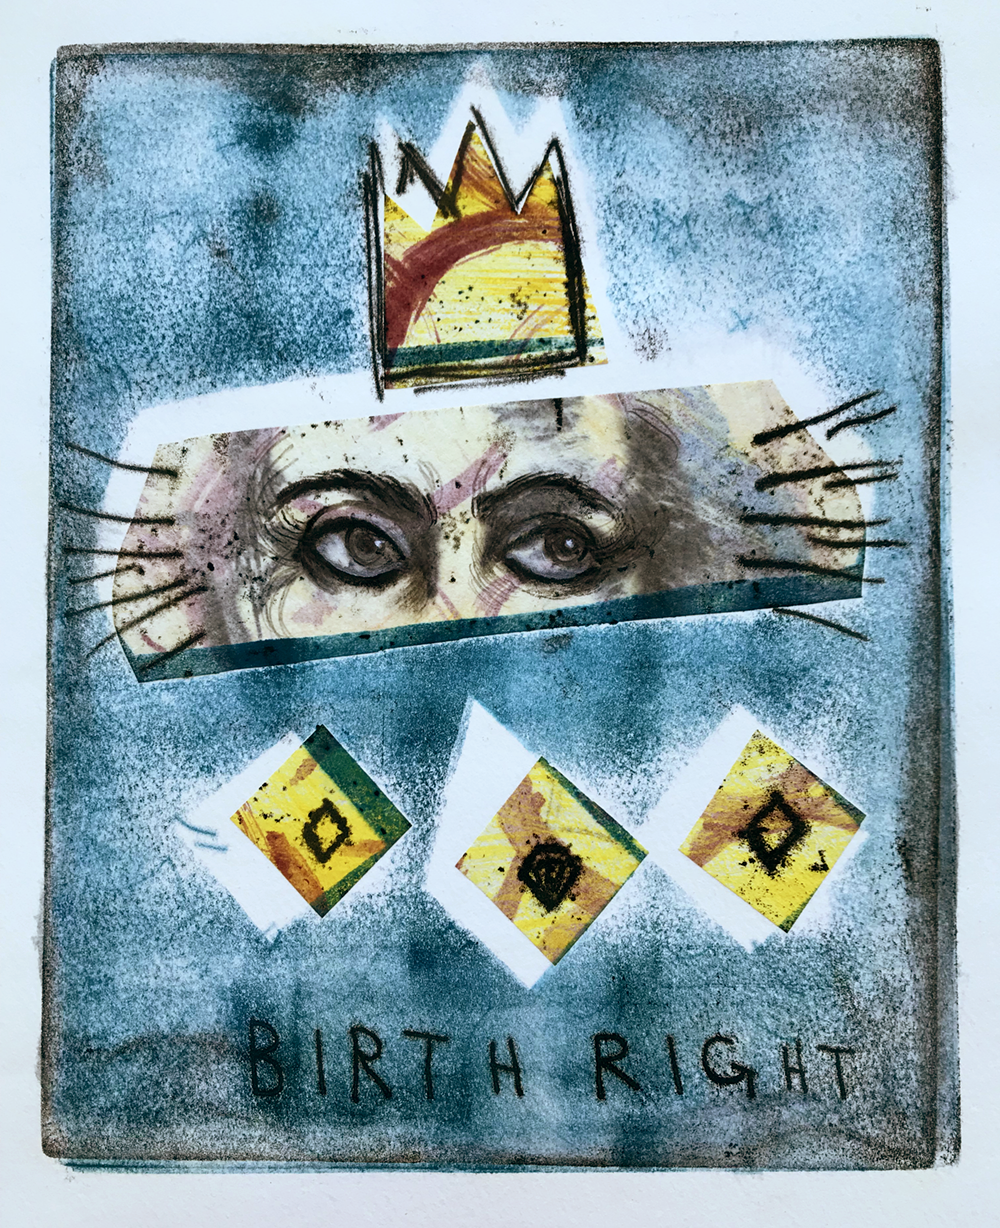 birthright-copy_orig.png